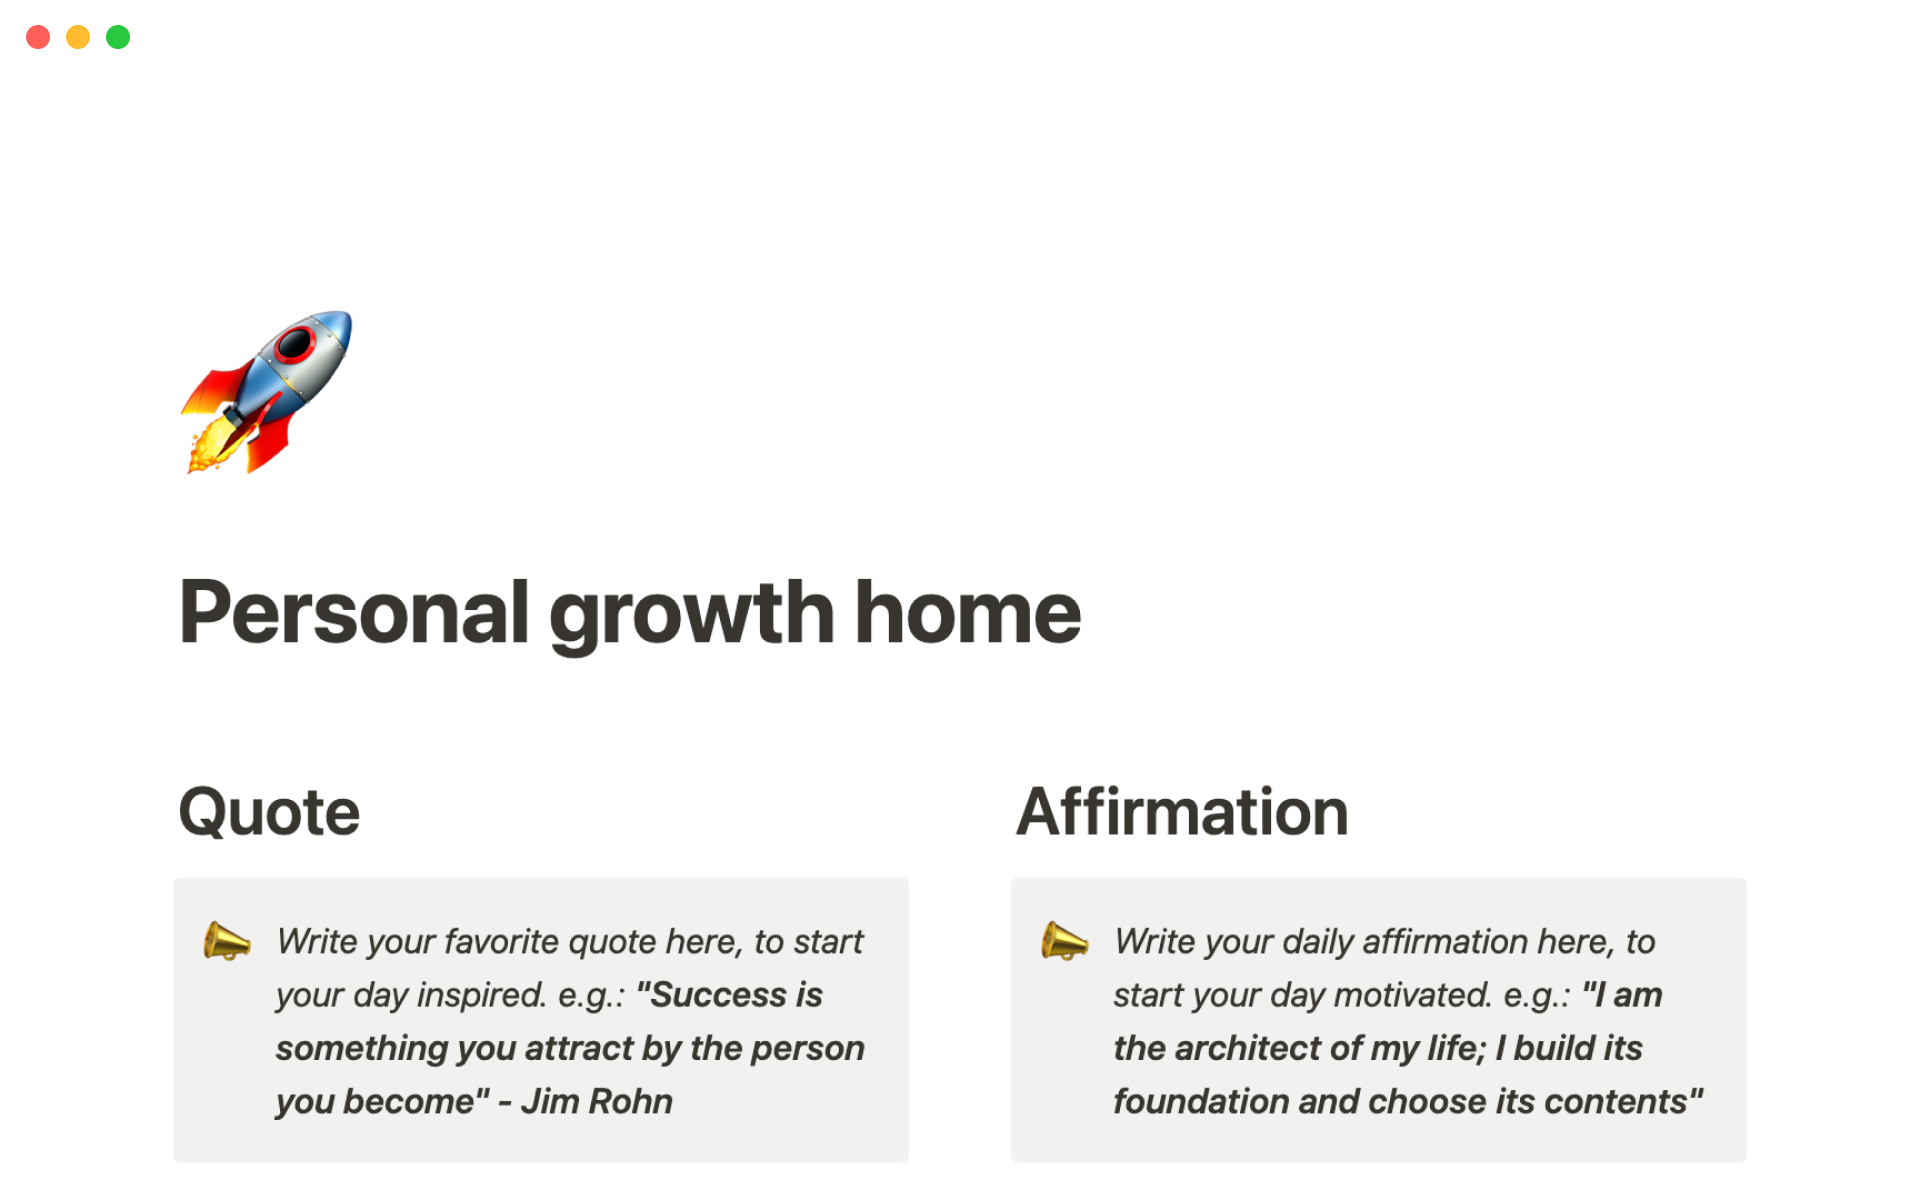 The desktop image for the Personal growth home template